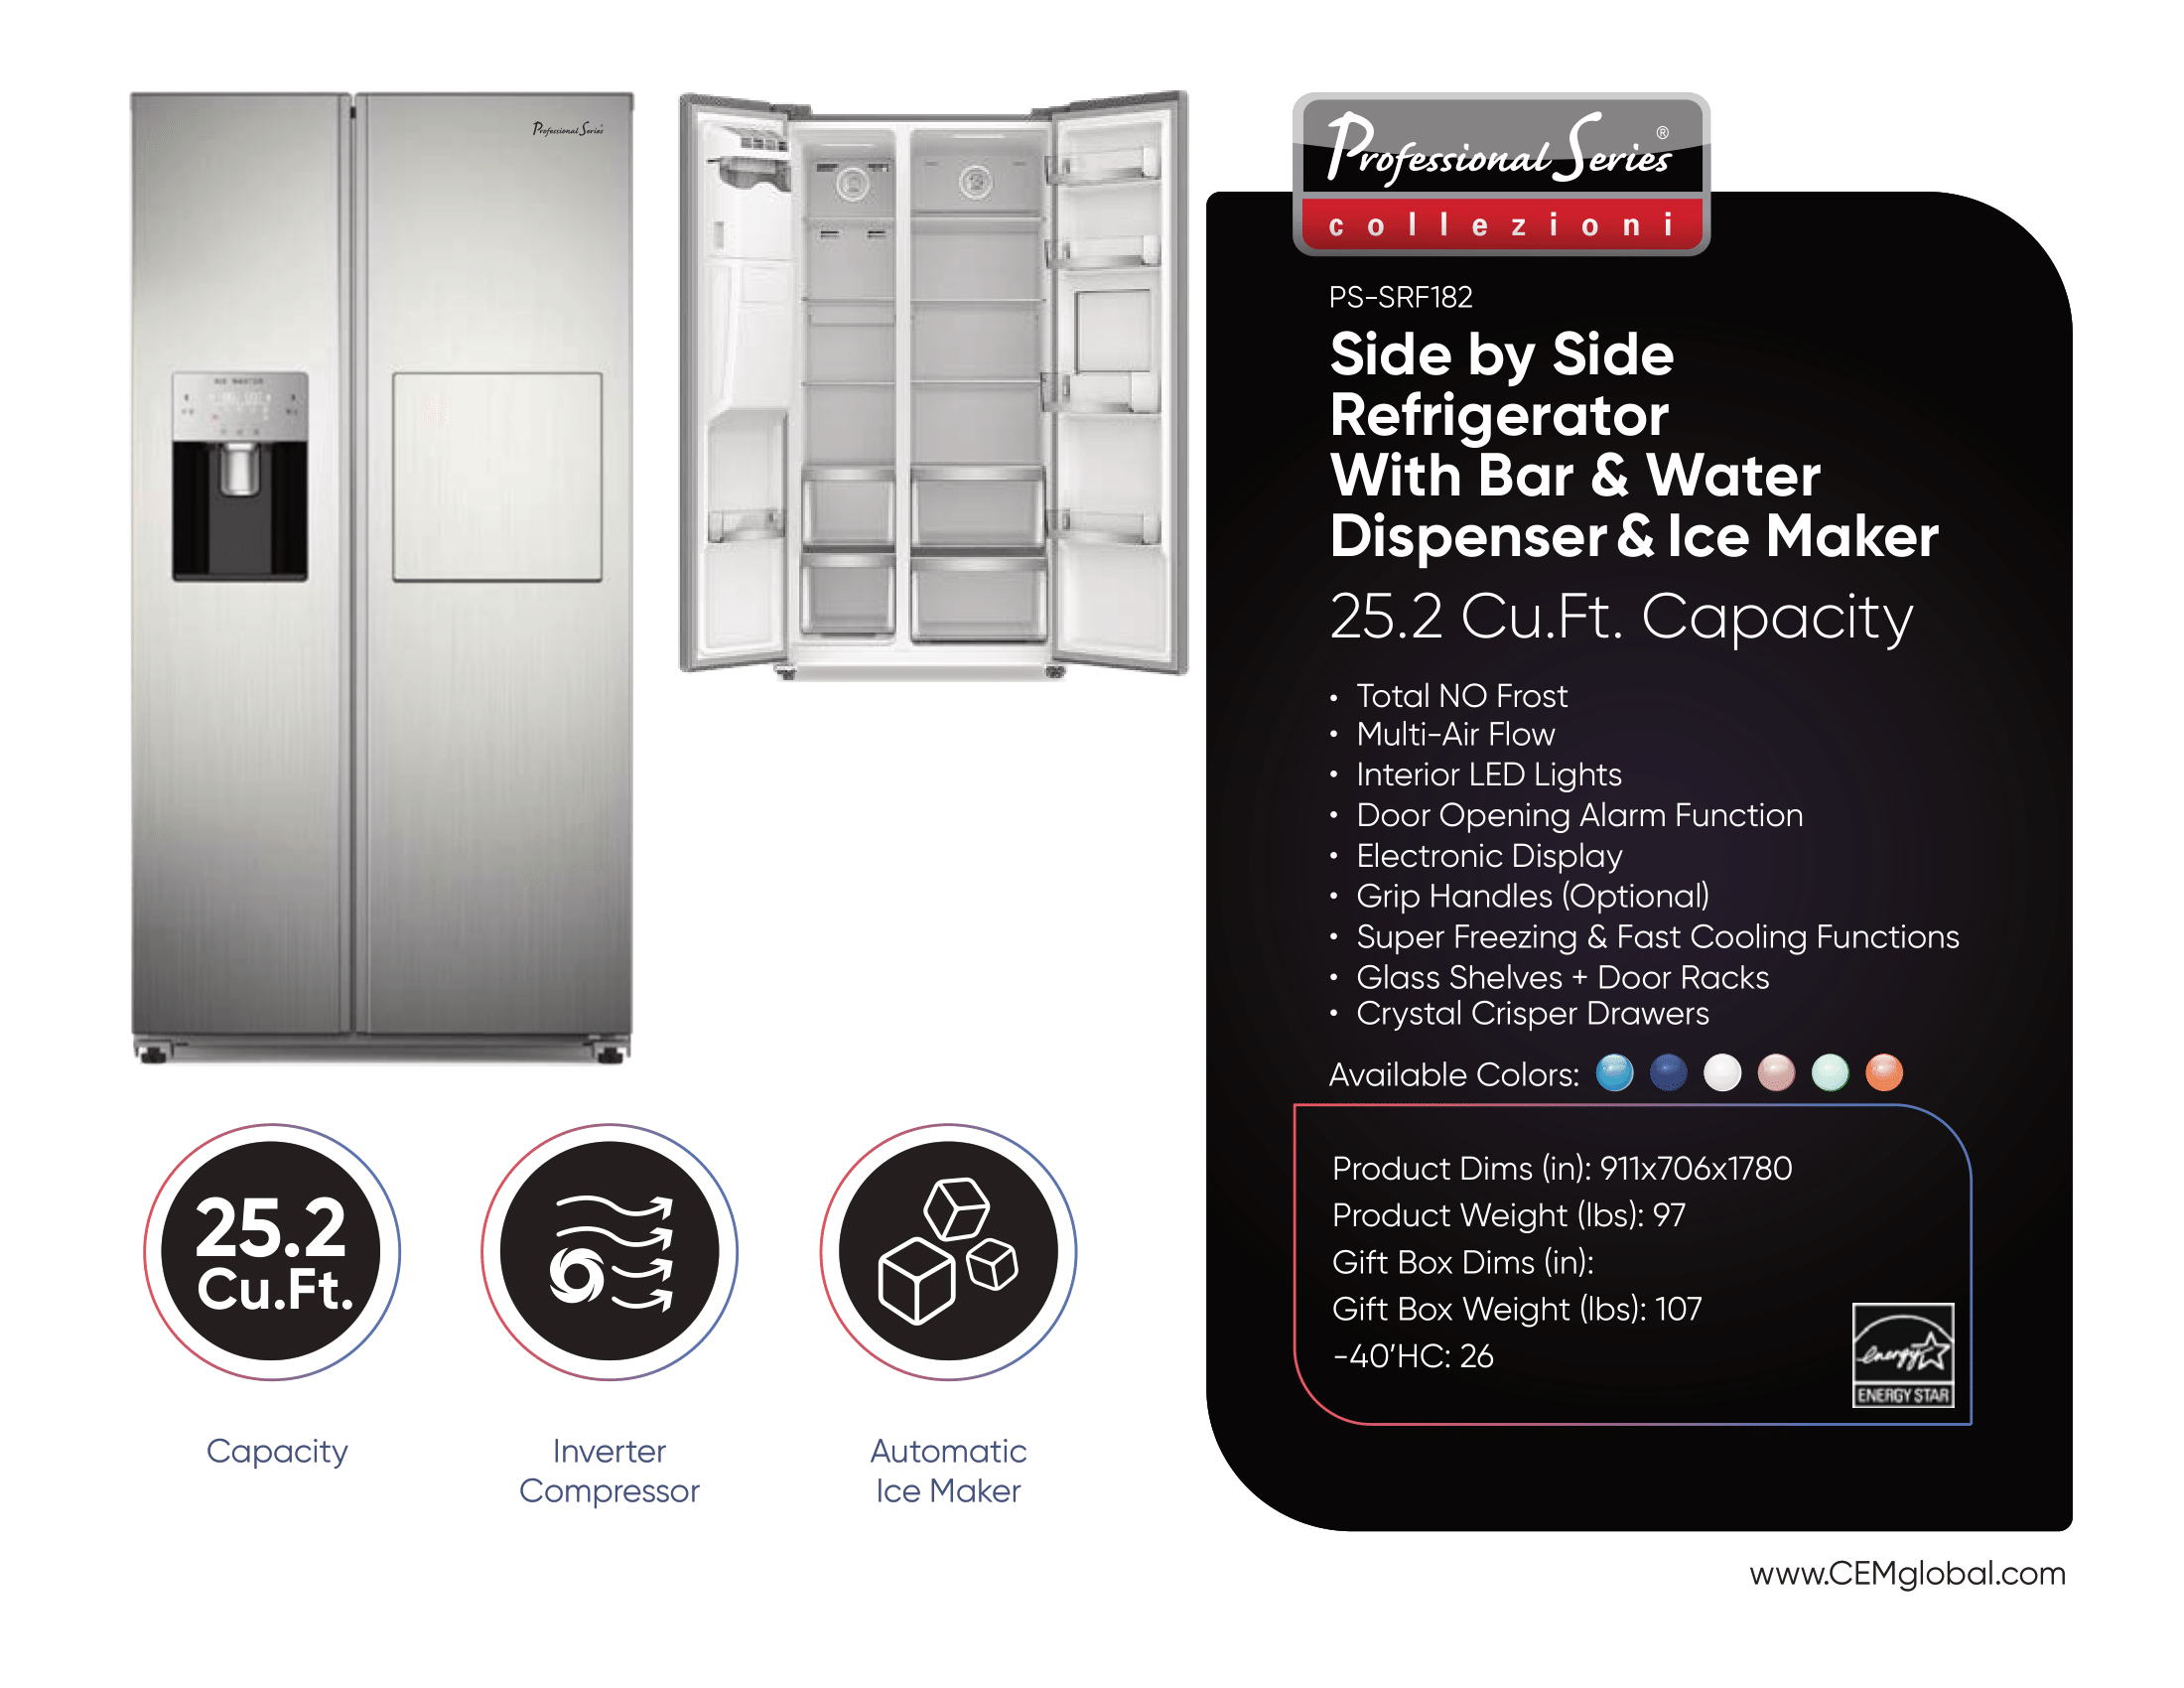 Side by Side Refrigerator With Bar & Water Dispenser & Ice Maker 25.2 Cu.Ft.